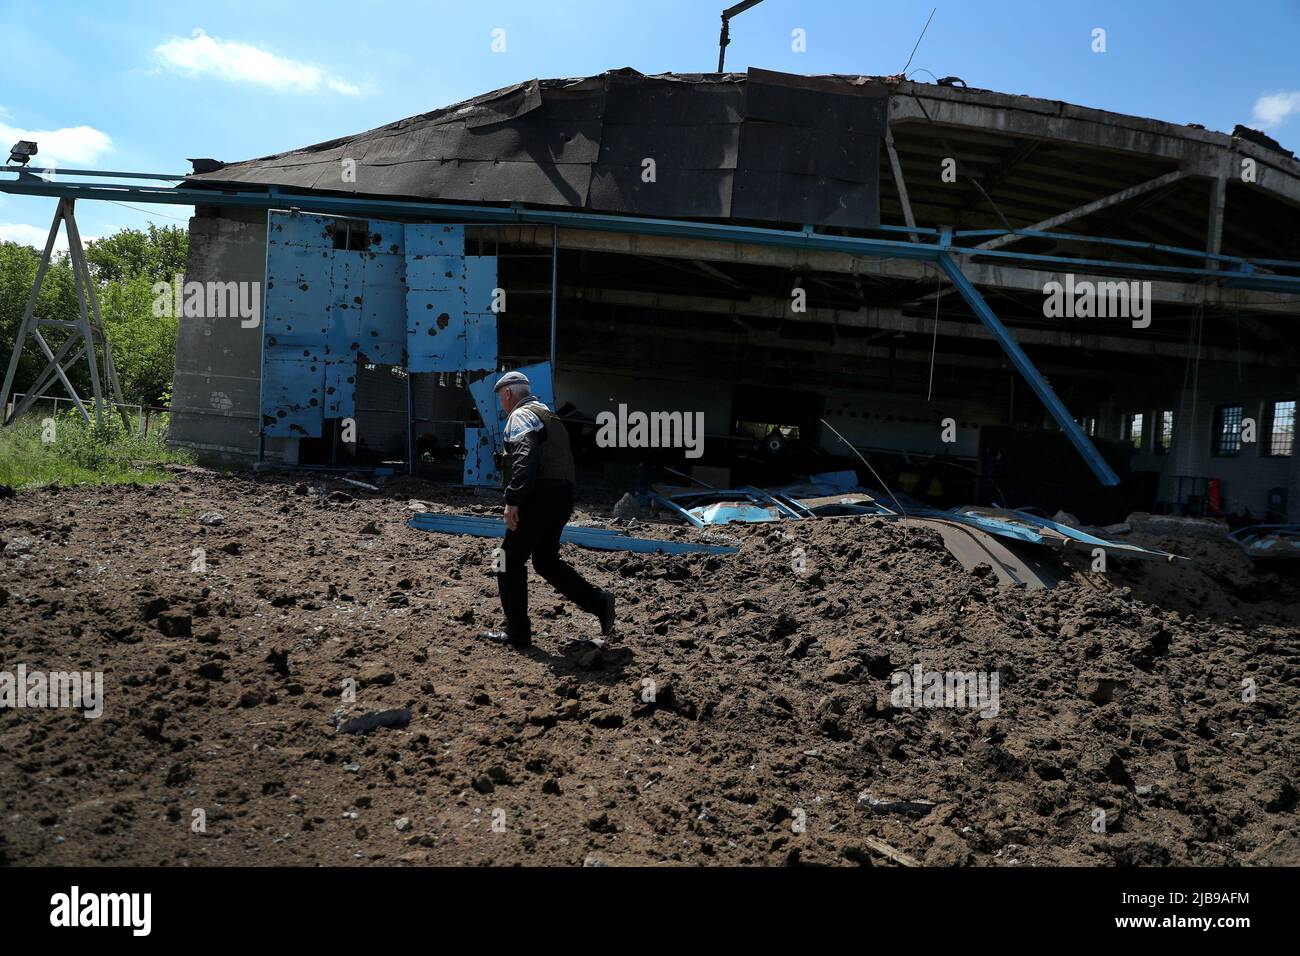 A man walks past a hangar at a damaged private airfield following a military strike, amid Russia's attack on Ukraine, on the outskirts of Kharkiv, Ukraine June 4, 2022. REUTERS/Ivan Alvarado Stock Photo